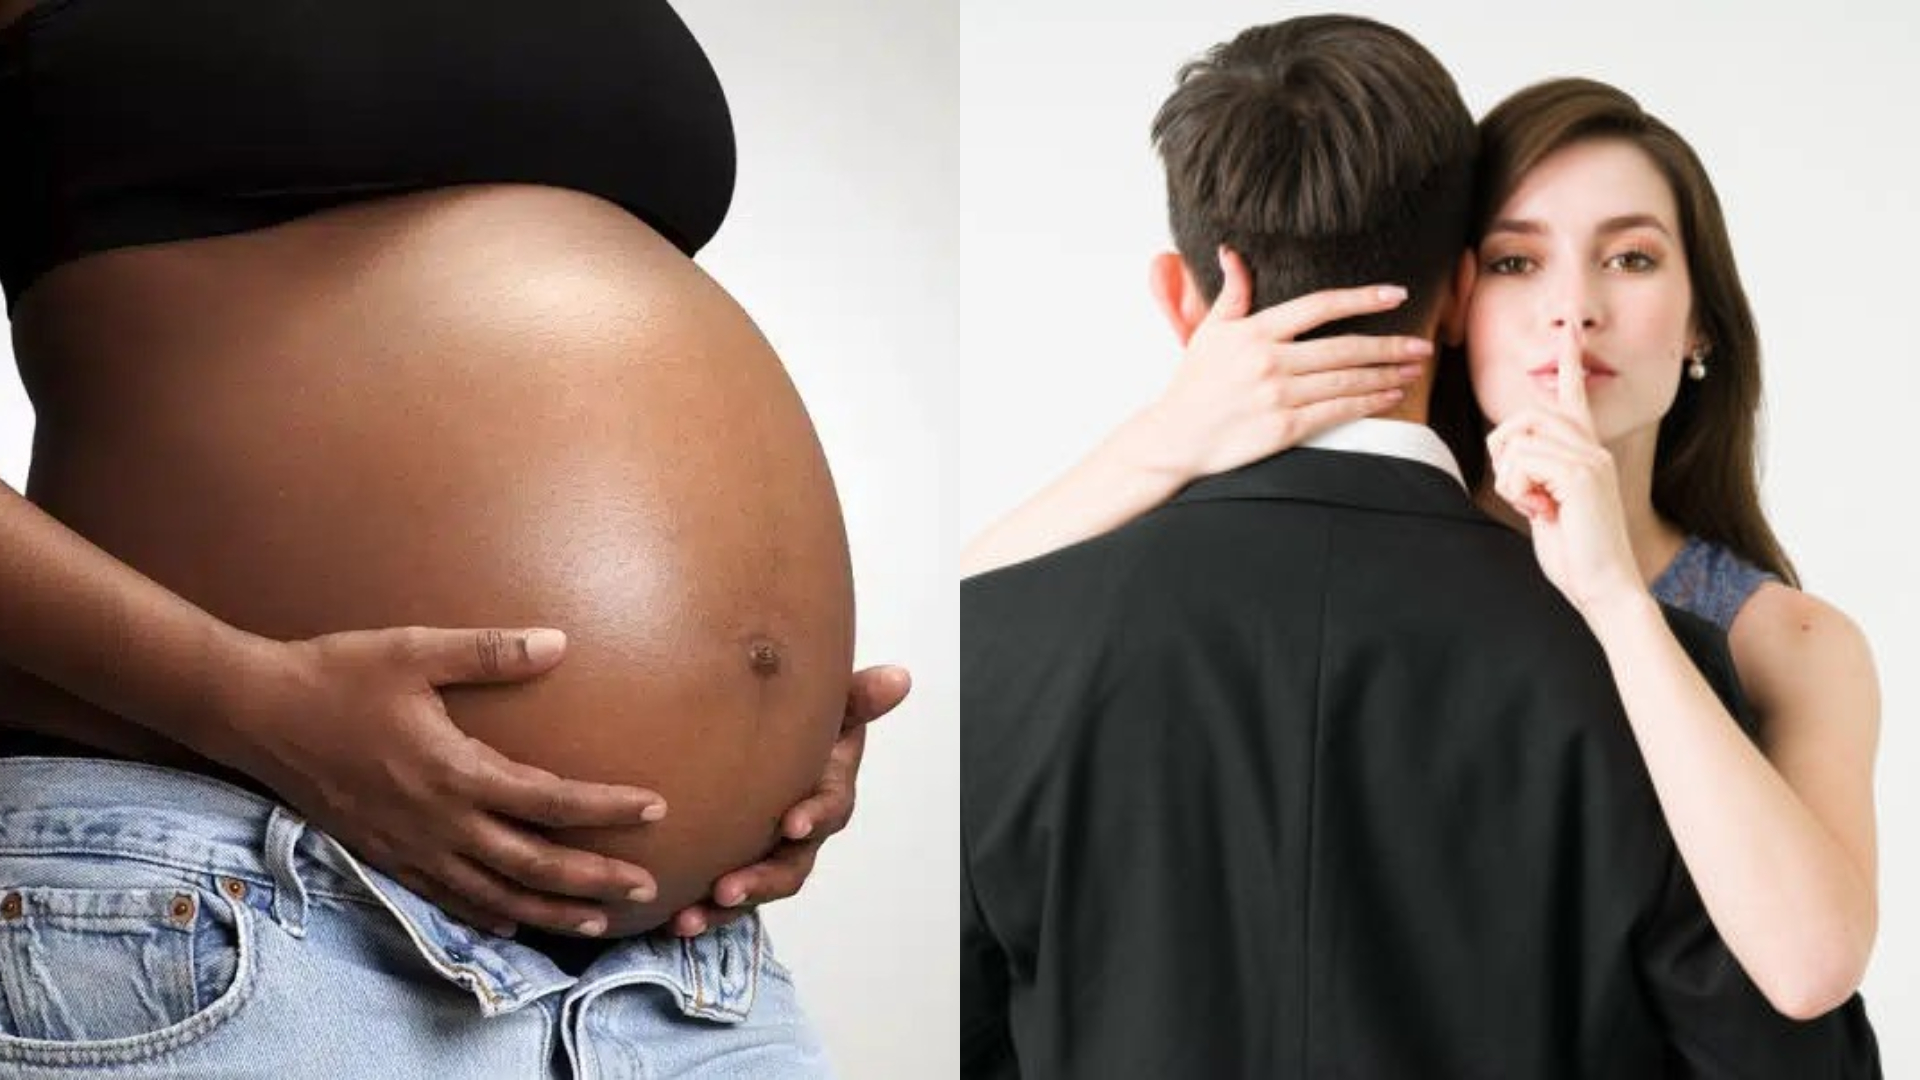 “If your husband can’t have a child, go outside and get pregnant secretly” — Man advises women